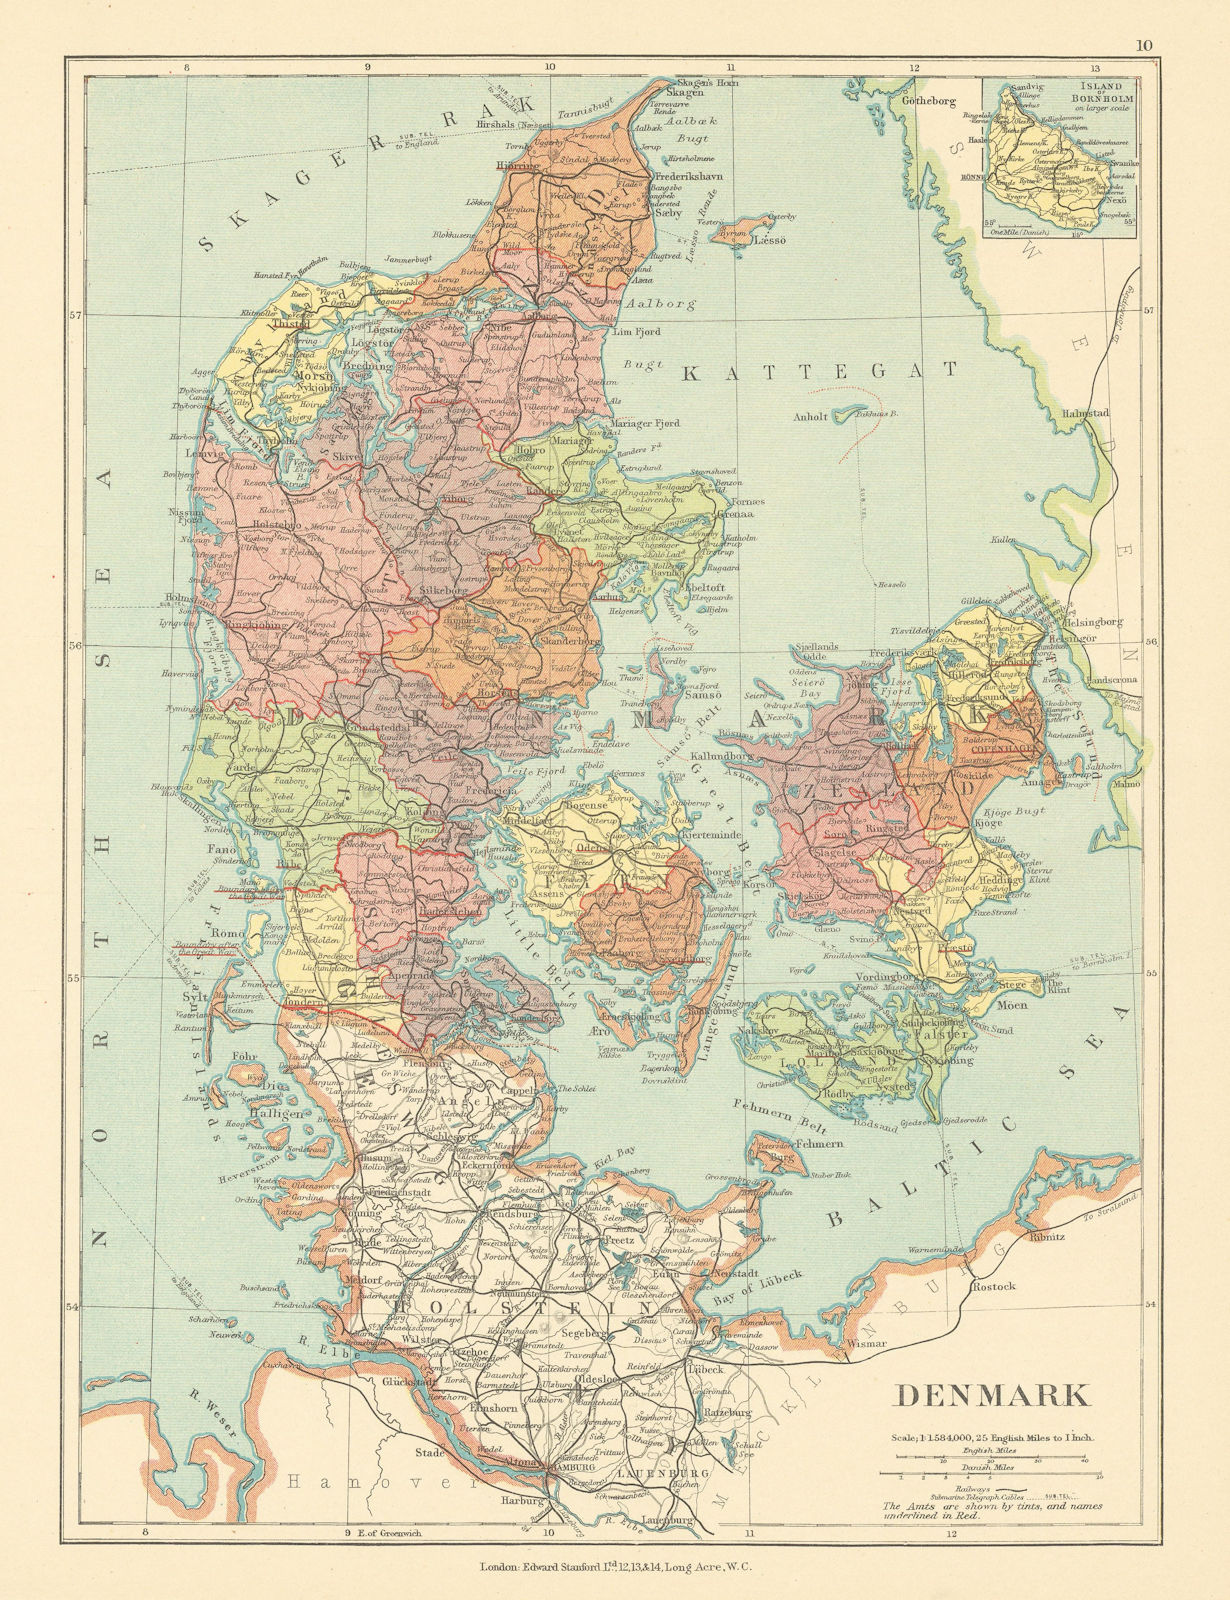 Associate Product Denmark in counties / amter. Railways. STANFORD c1925 old vintage map chart